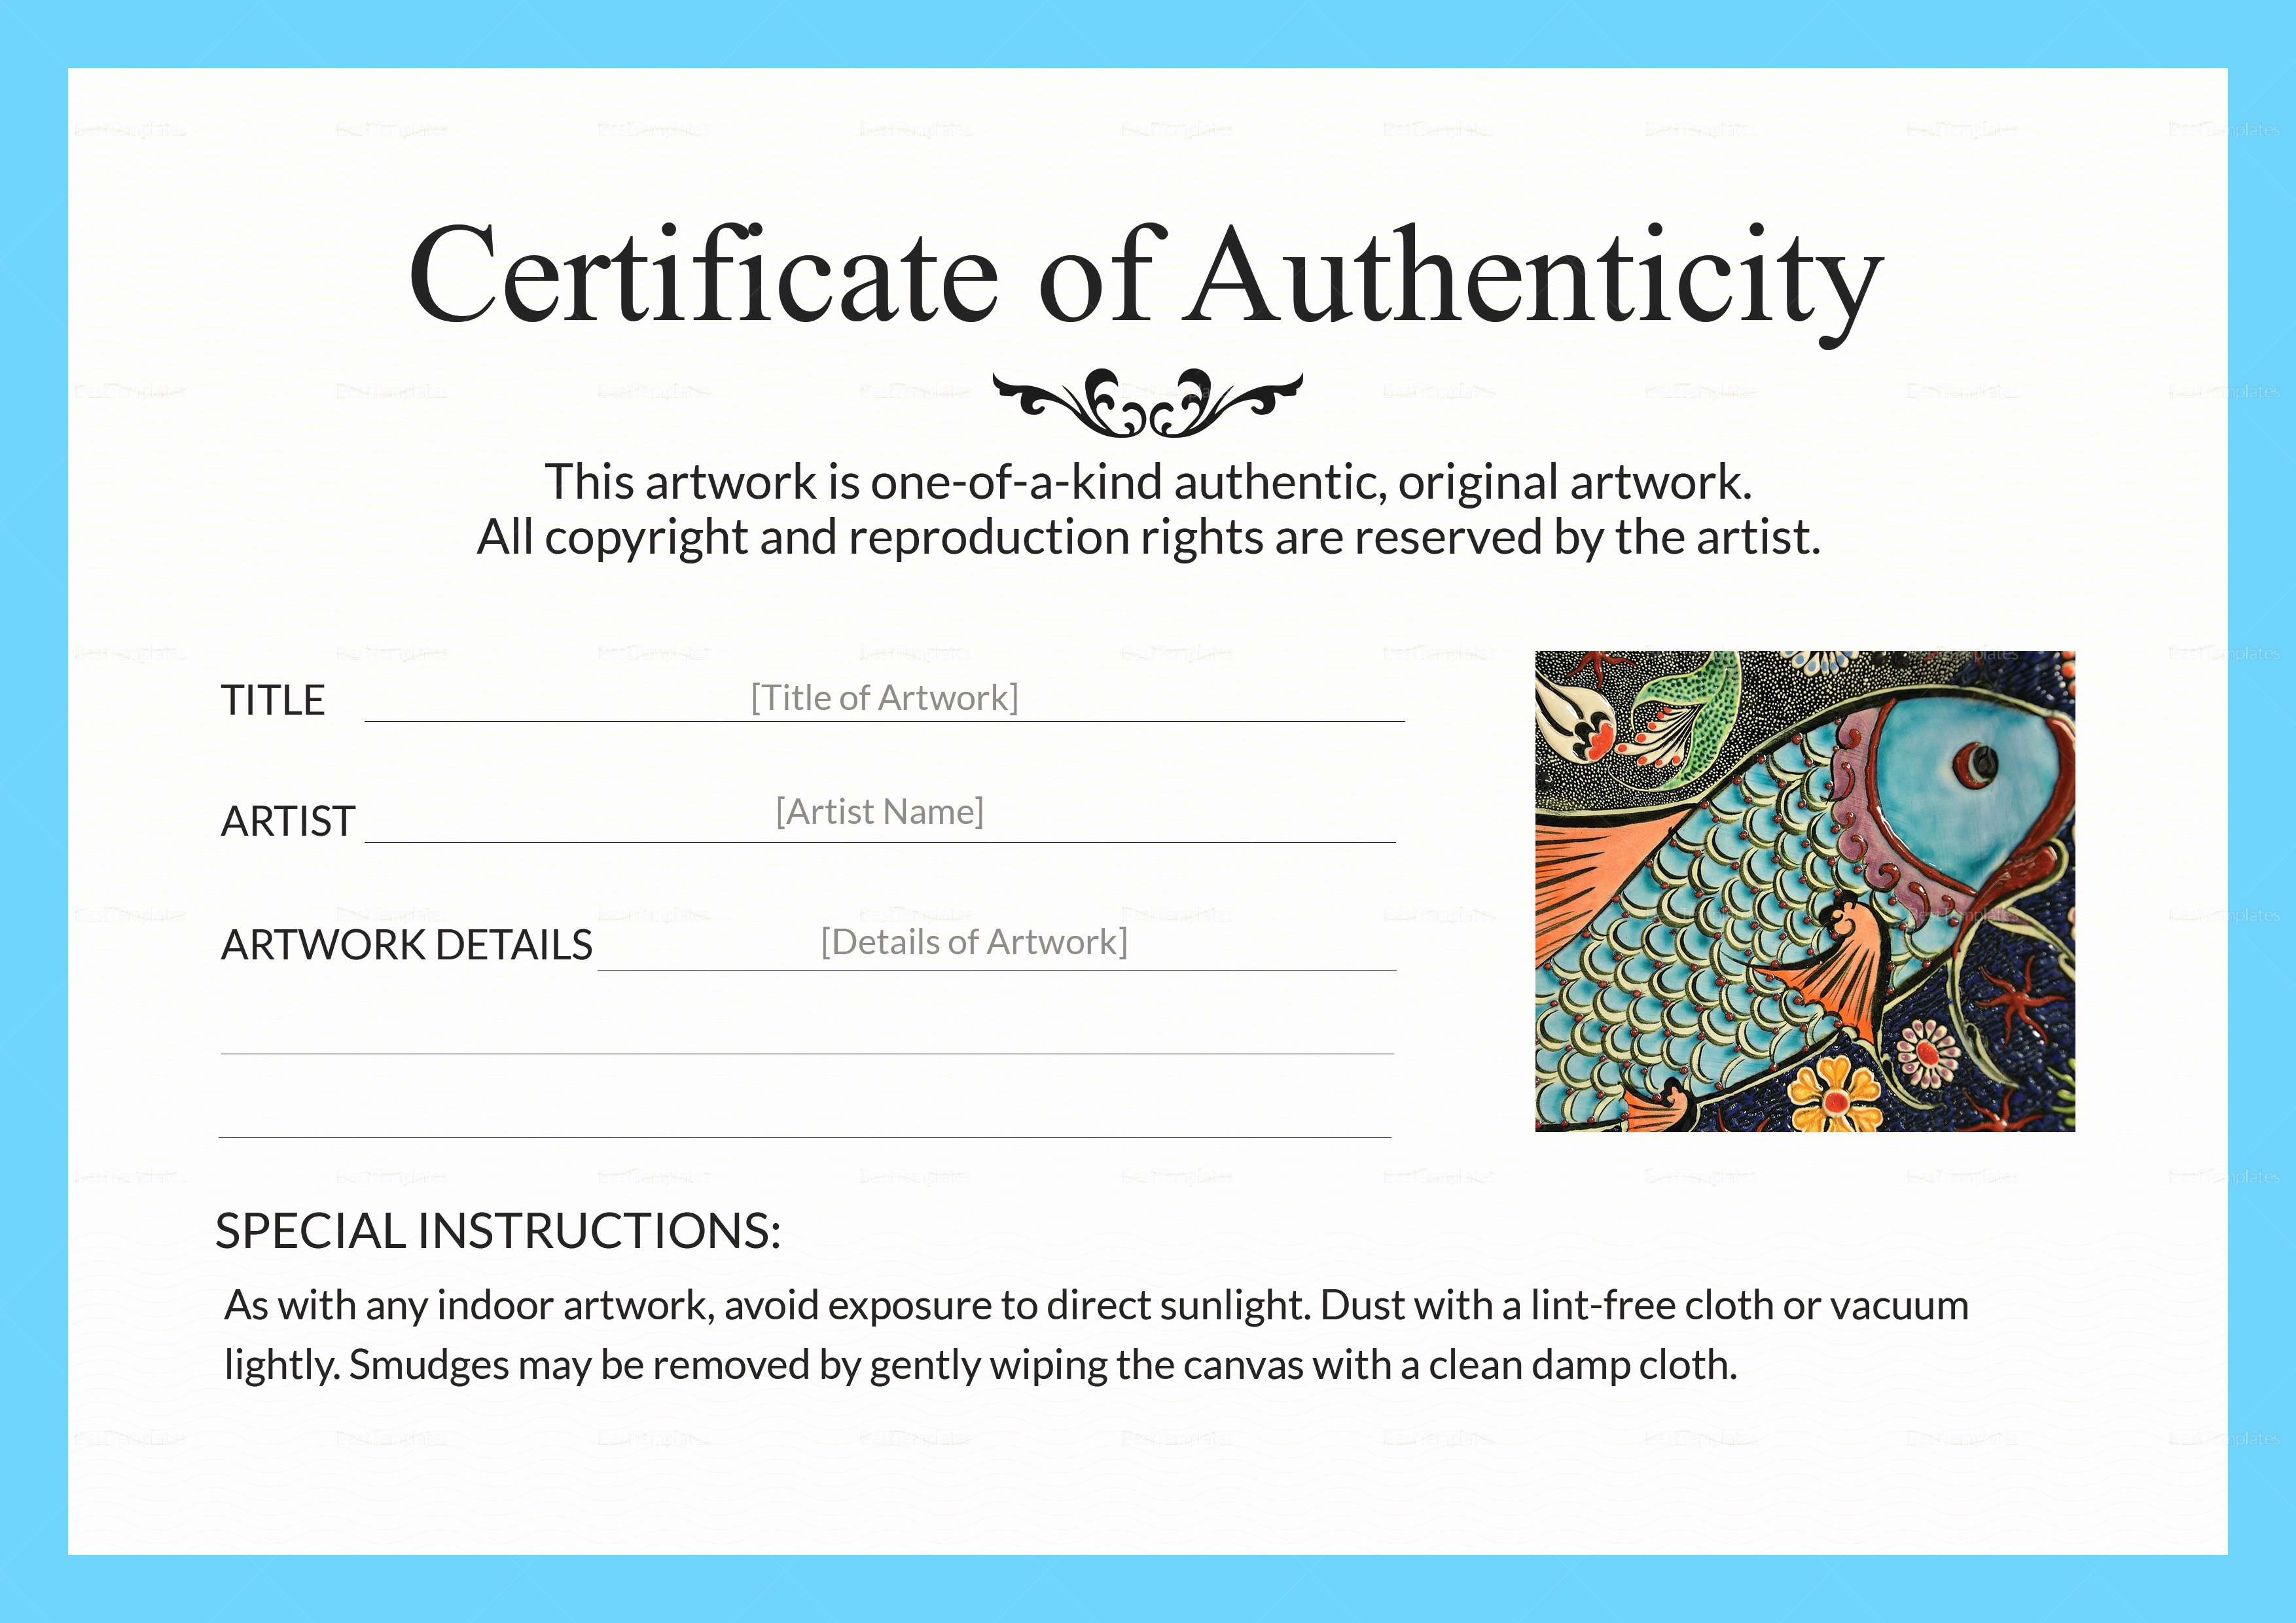 Certificate Of Authenticity Template Free Unique Artwork Authenticity Certificate Design Template In Psd Word